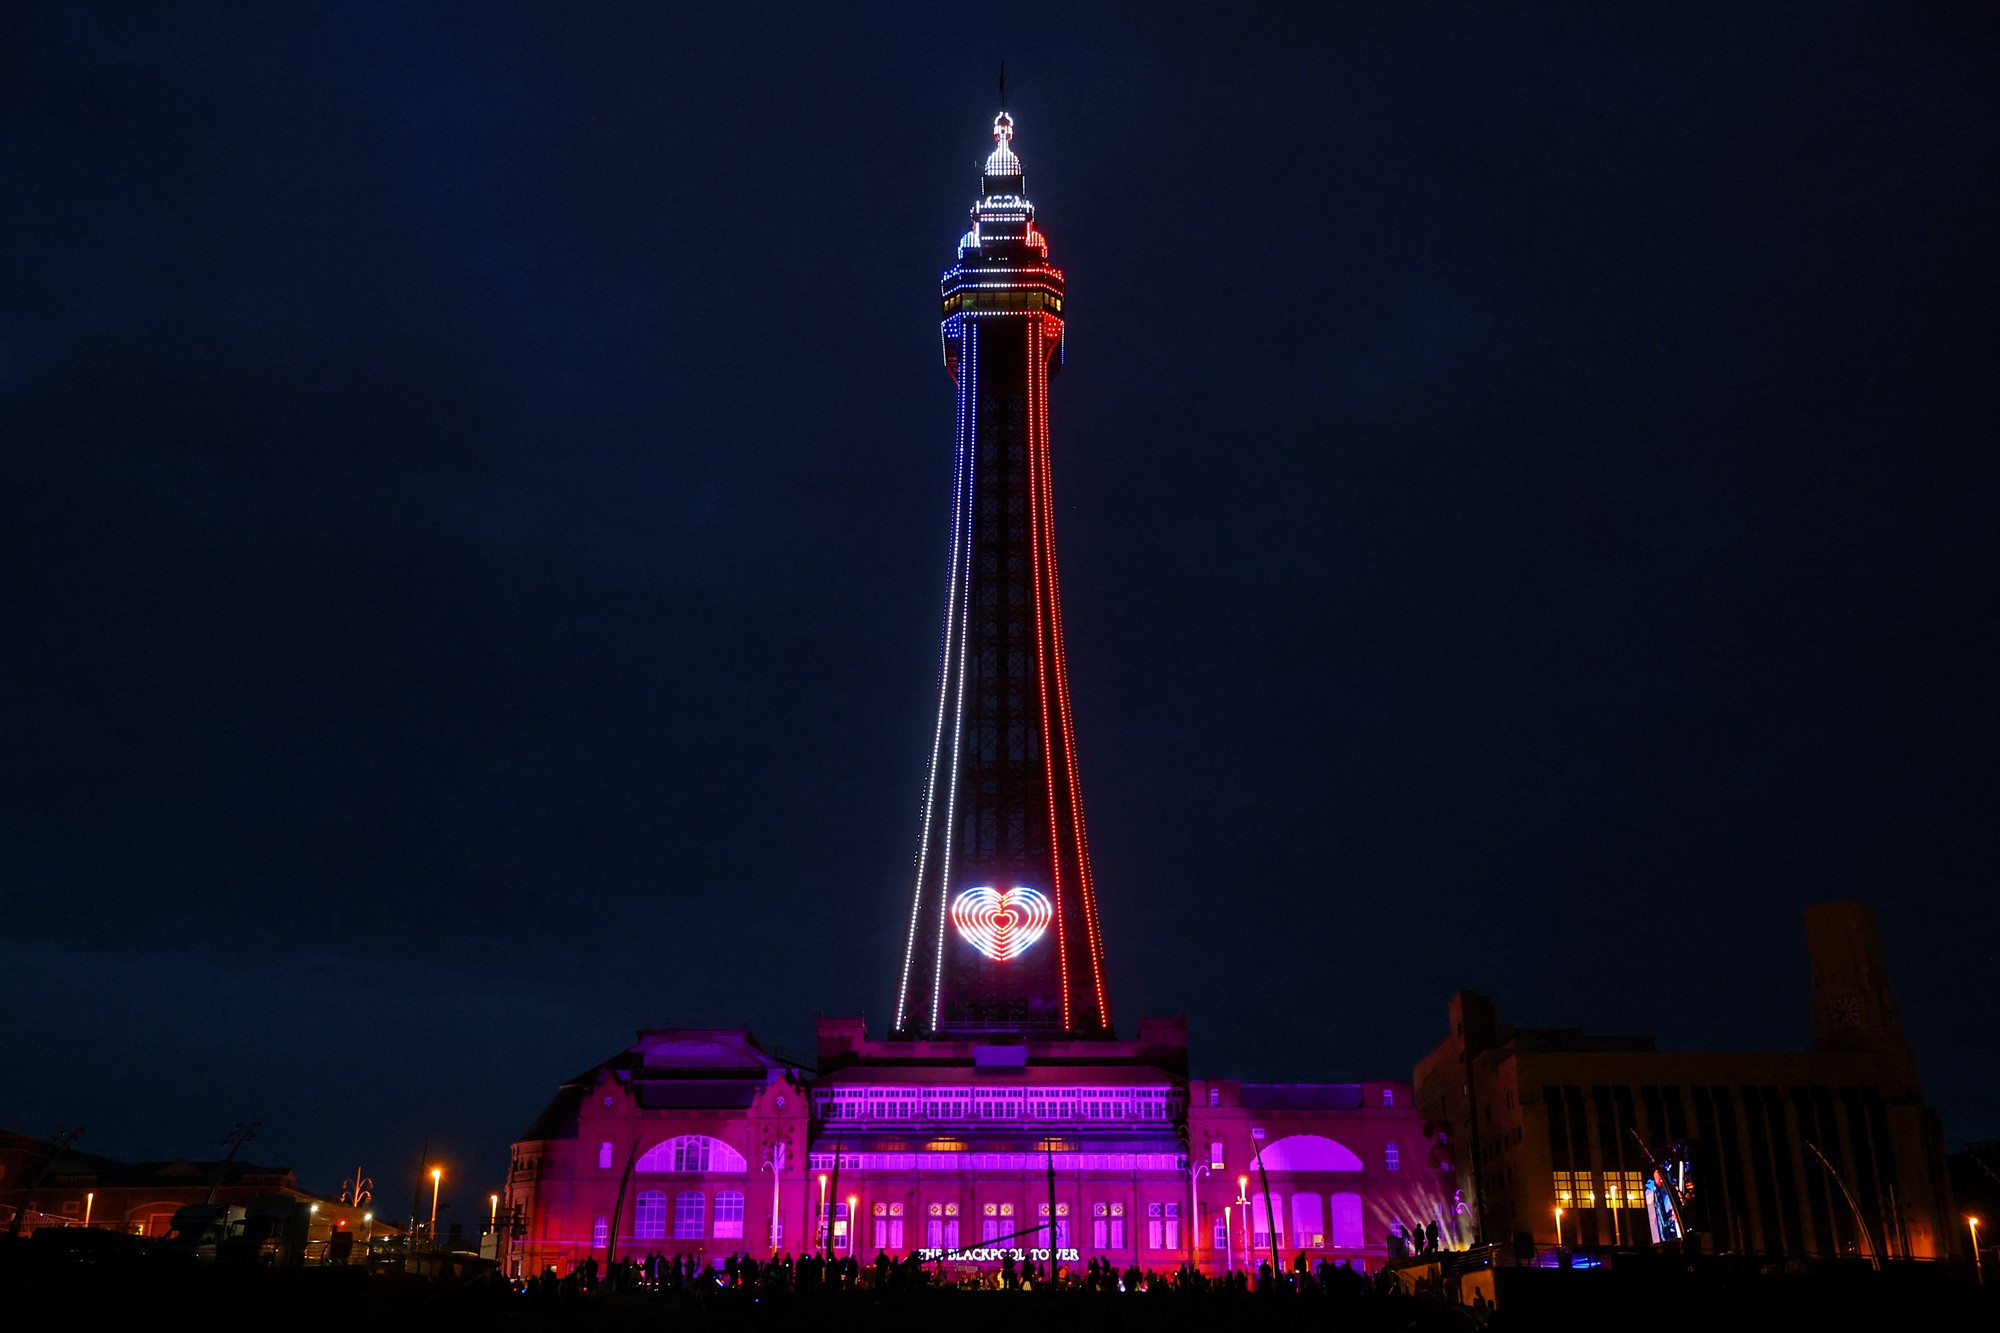 The Blackpool Tower lit up un blue and red.